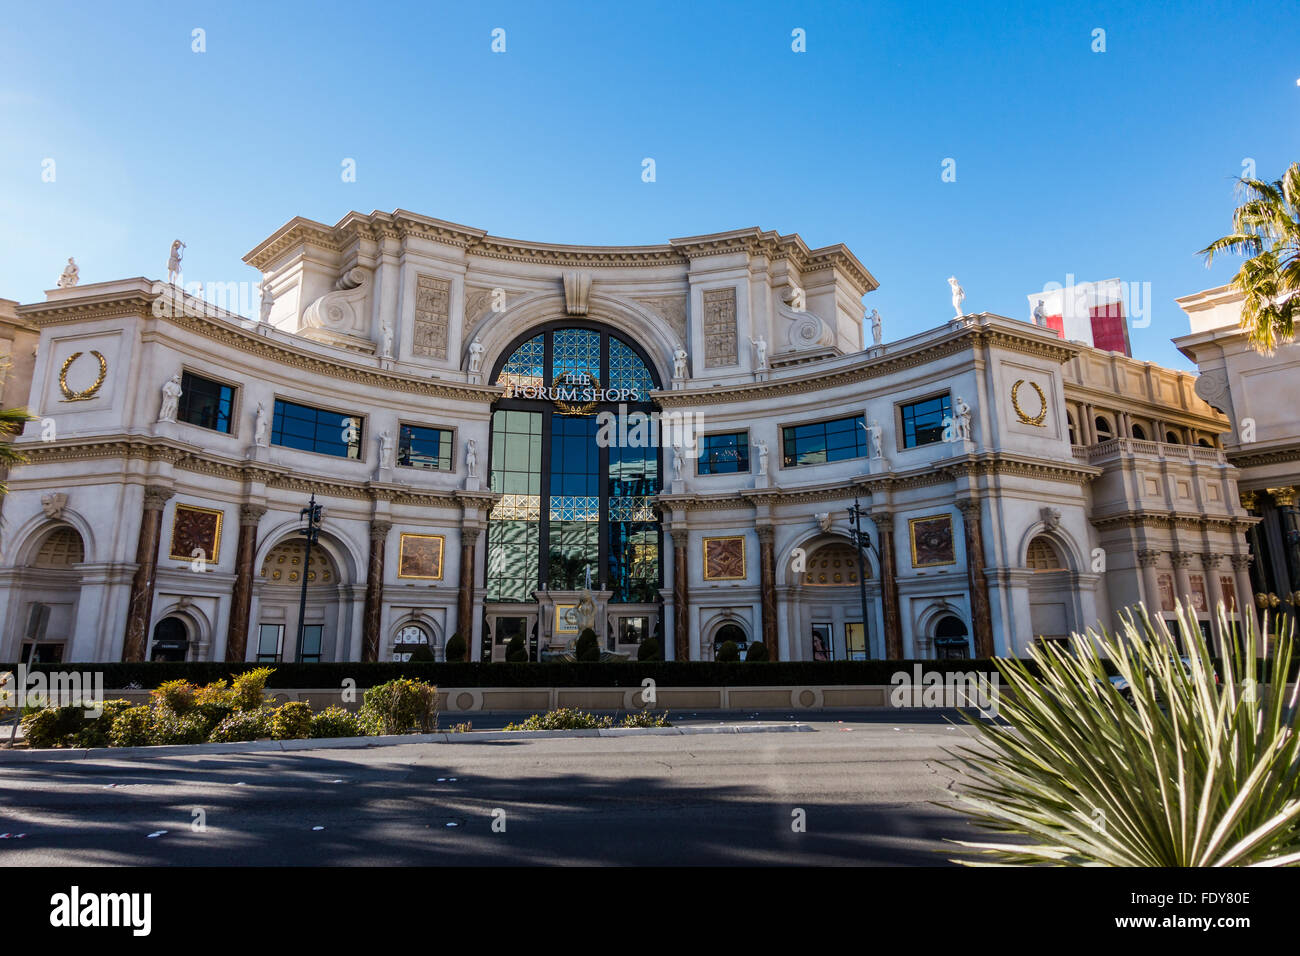 The Forum Shops at Caesars Palace - Lifestyle & Culture Photos - A  LEFT-EYED VIEW